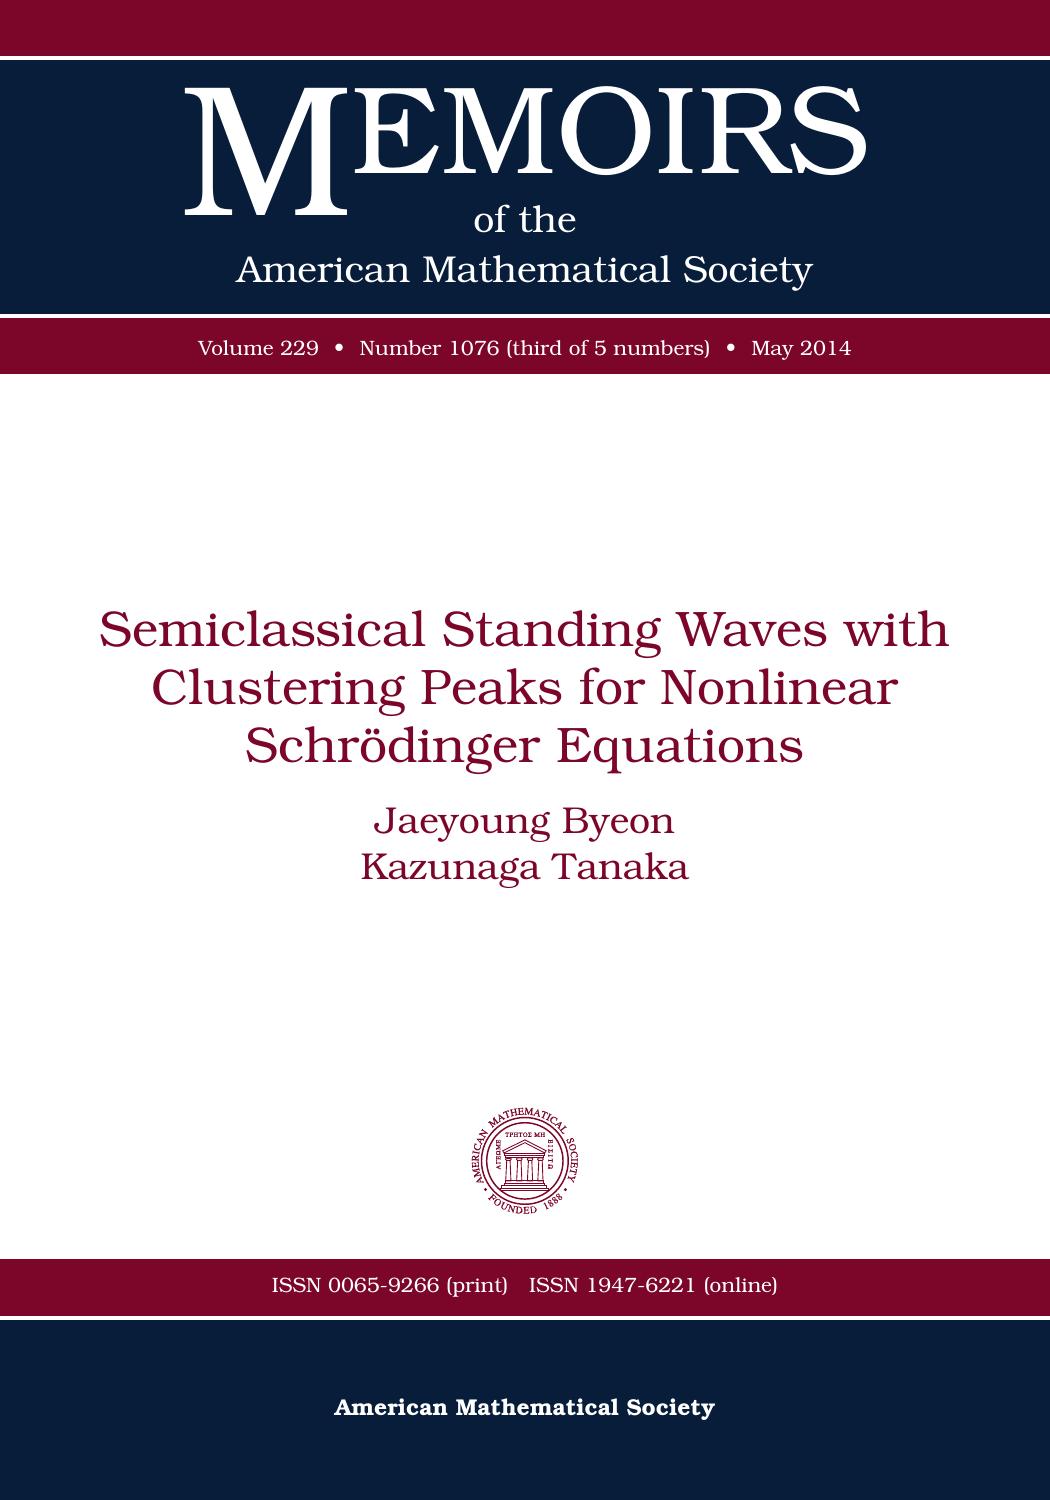 Semiclassical Standing Waves With Clustering Peaks for Nonlinear Schrödinger Equations